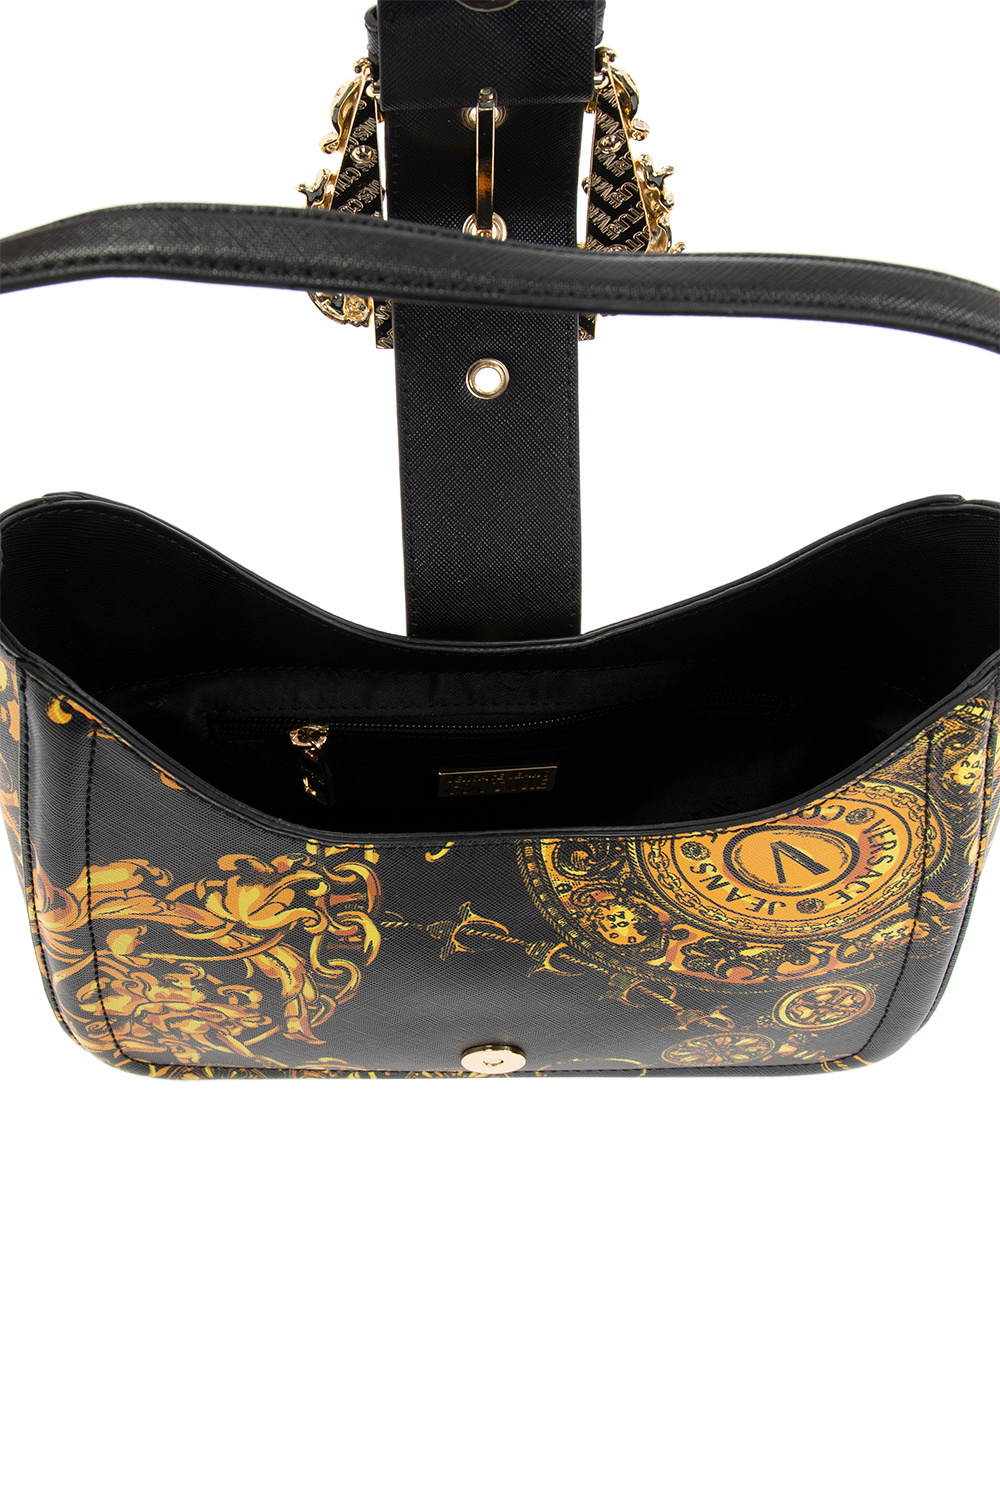 Versace Jeans Couture Hand bag